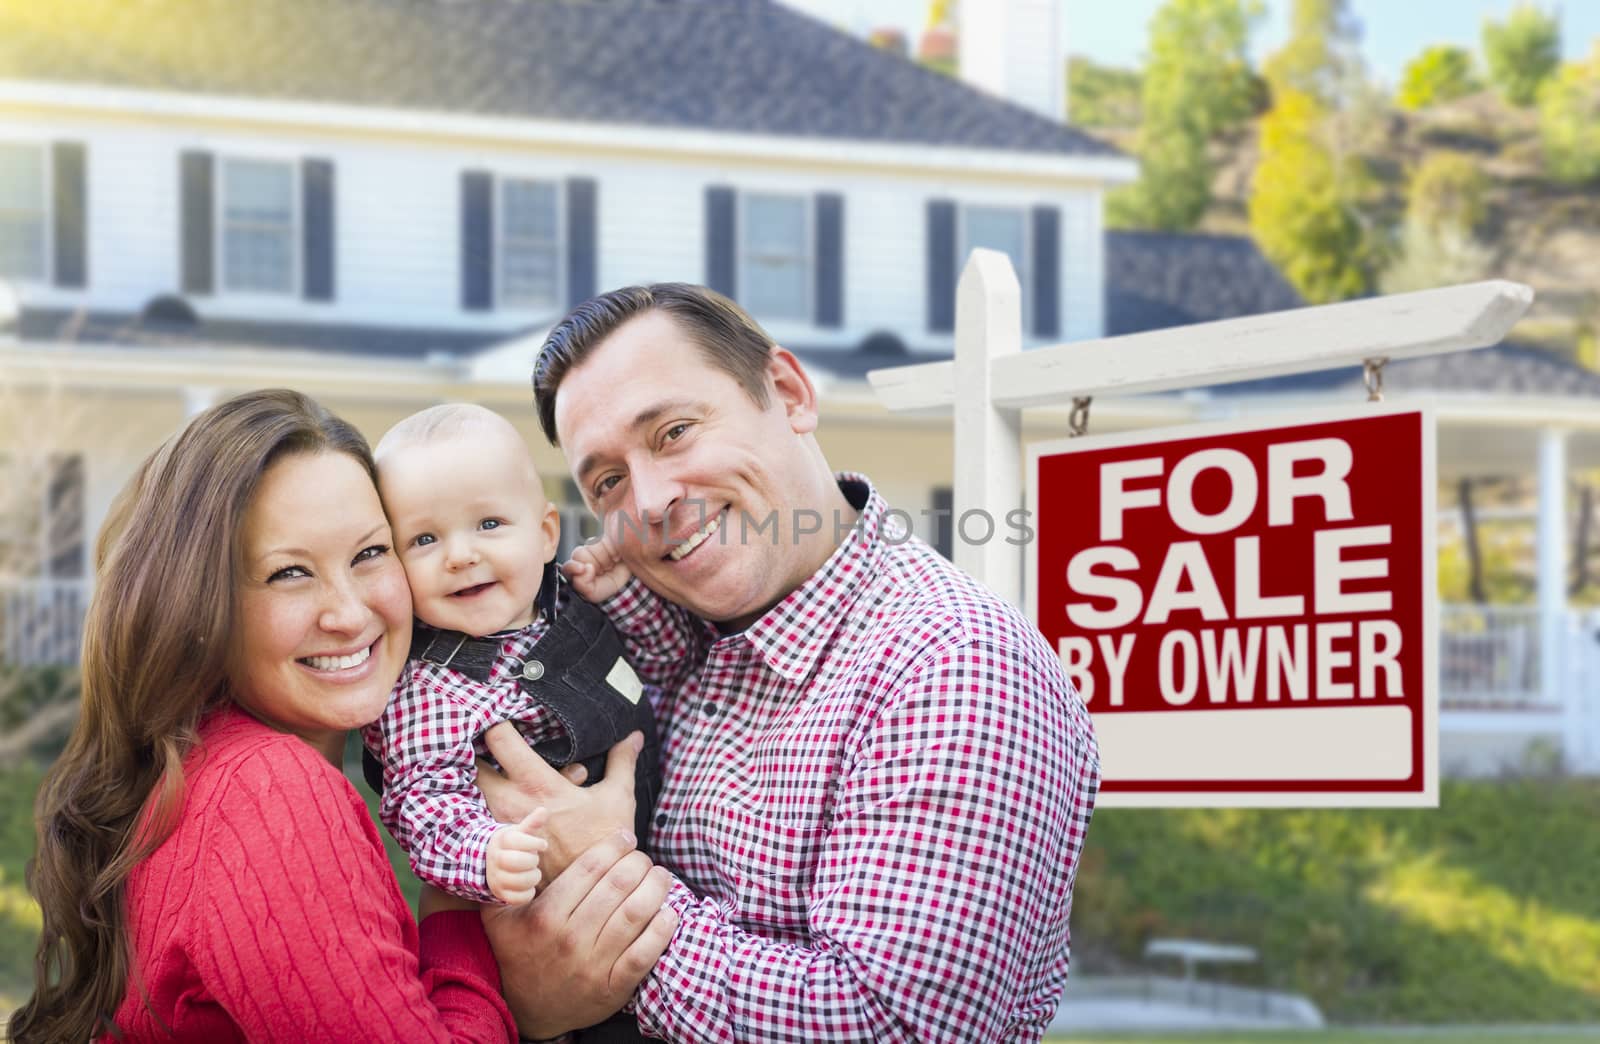 Happy Young Family In Front of For Sale By Owner Real Estate Sign and House.